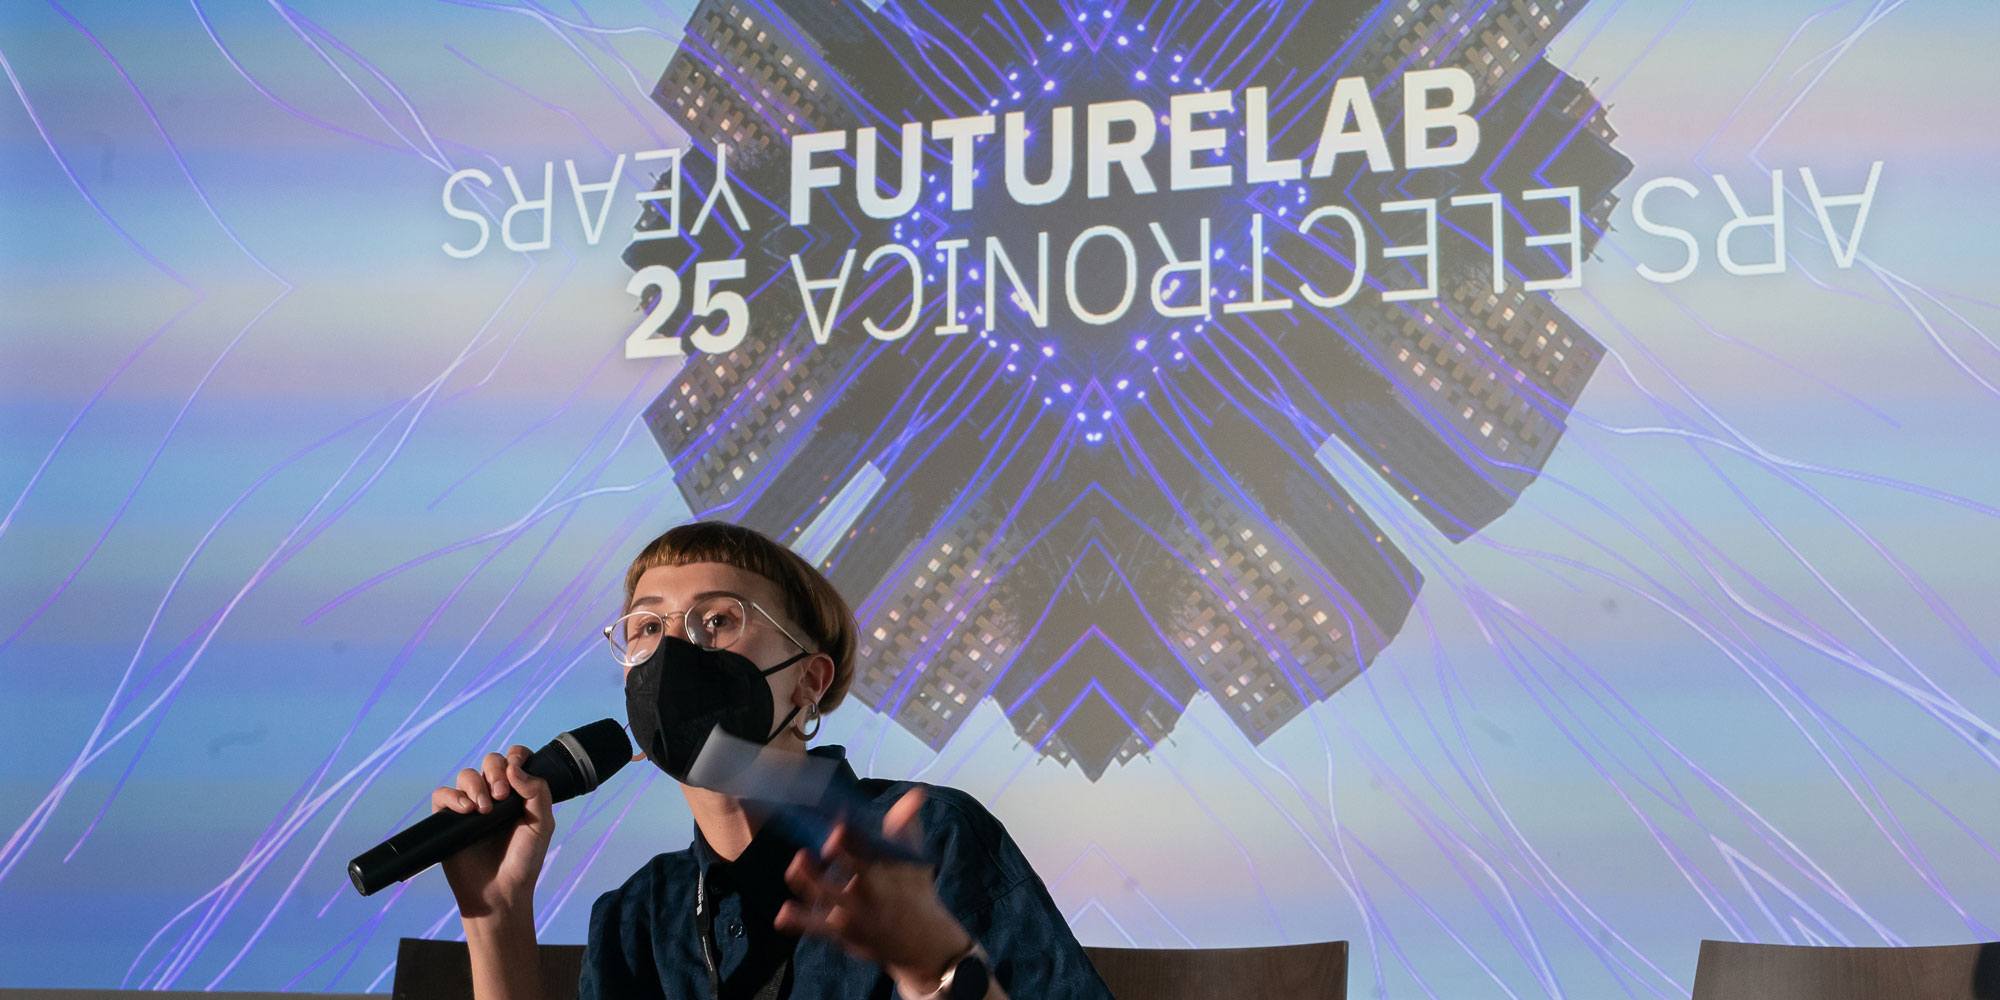 Denise Hirtenfelder, Ars Electronica Futurelab:  International experts, researchers and artists, young innovators and future activists were interviewed about the important questions of the present and the future in Deep Issue Talks and an open discussion. They offered their thoughts on a viable path and what specific actions to take.